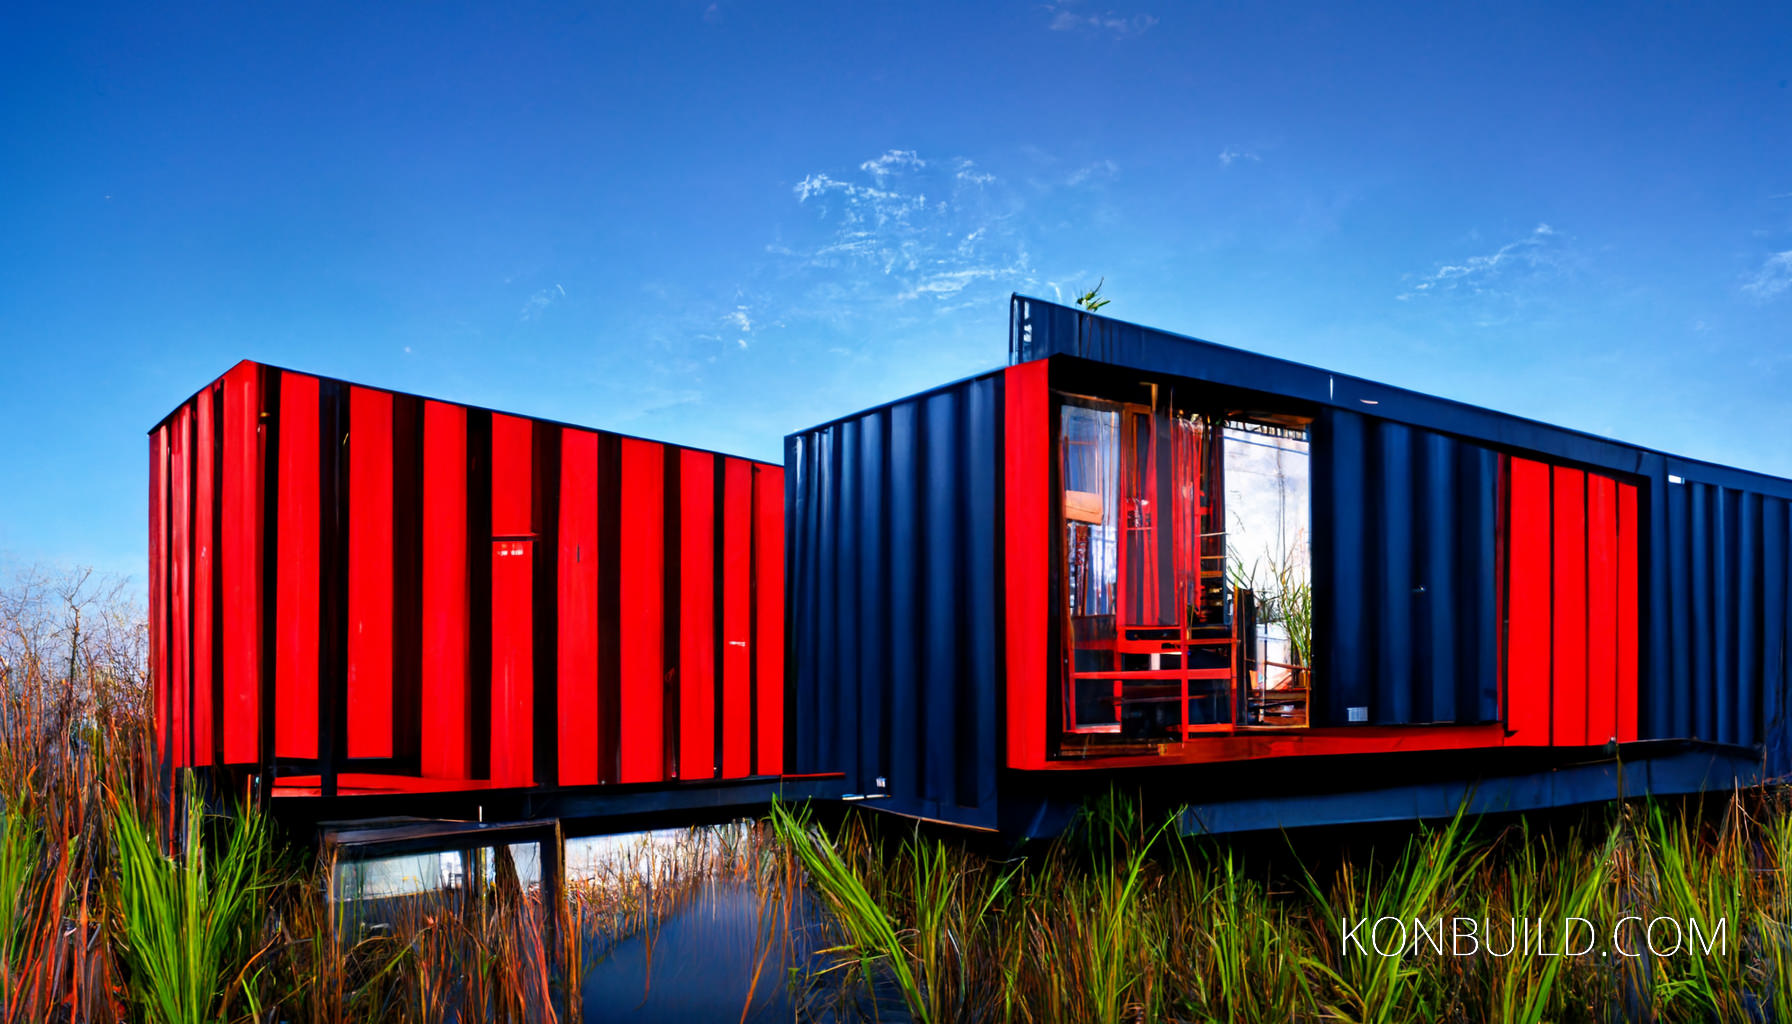 A modern container concept over a lake.